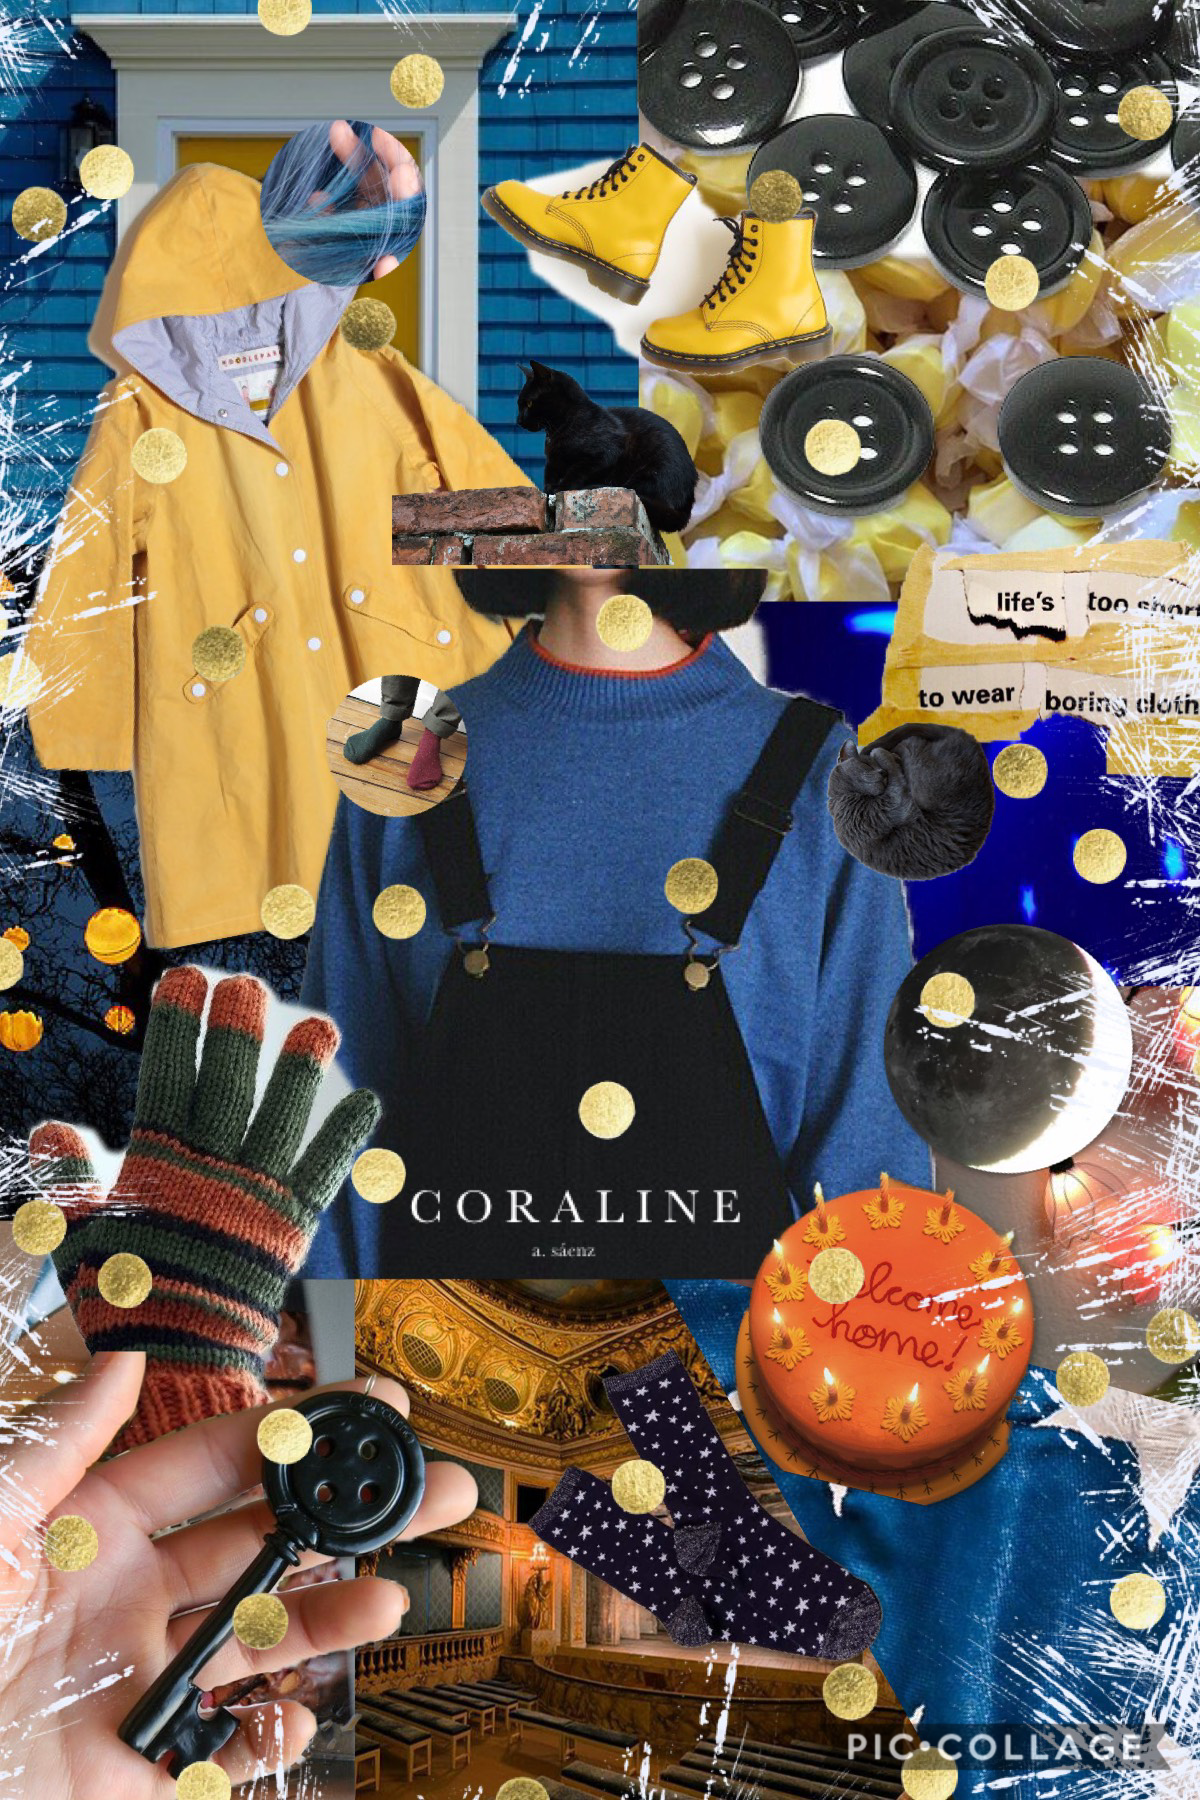 quantum physics and chill, anyone? 💫🌌✨ also, what’s your take on coraline and your favorite song right now? ☄️